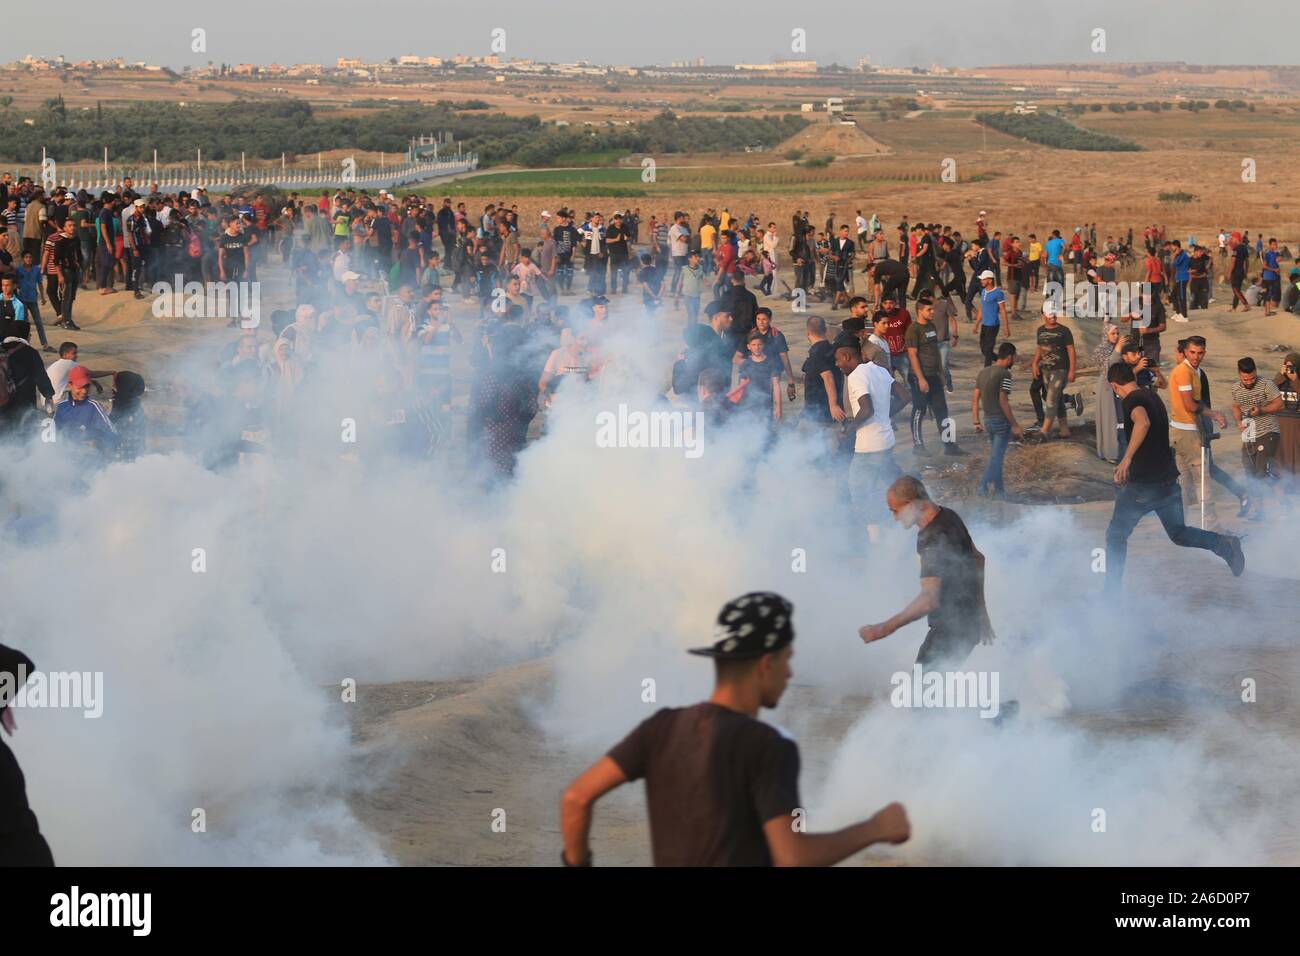 Al-Buraj Refugee Camp, The Gaza Strip, Palestine. 25th Oct, 2019. Clashes between Palestinians and Israeli troops east al-Buraj refugee camp in central of the Gaza Strip. Palestinian protesters were shot and injured with Israeli live ammunition, during the protest. Credit: Mahmoud Khattab/Quds Net News/ZUMA Wire/Alamy Live News Stock Photo